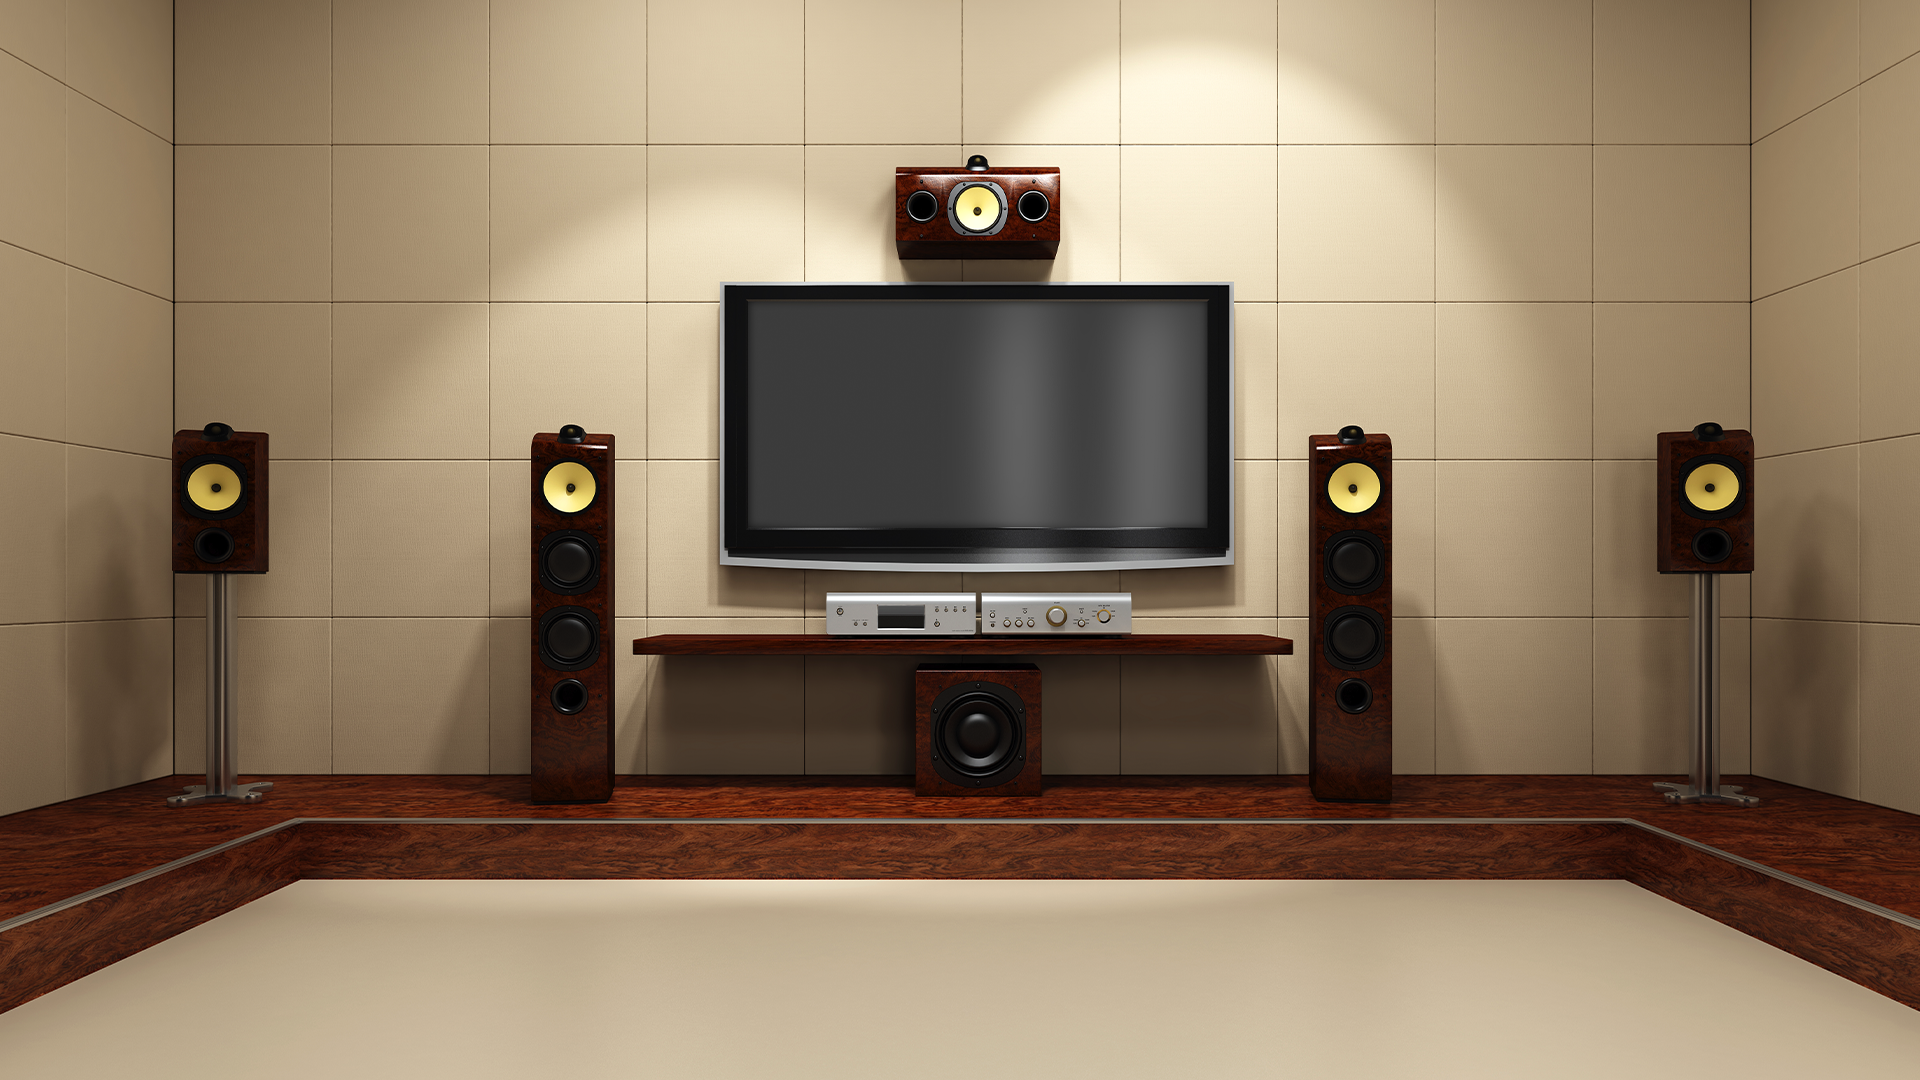 Why Surround Sound Doesn’t Make Sense for Music